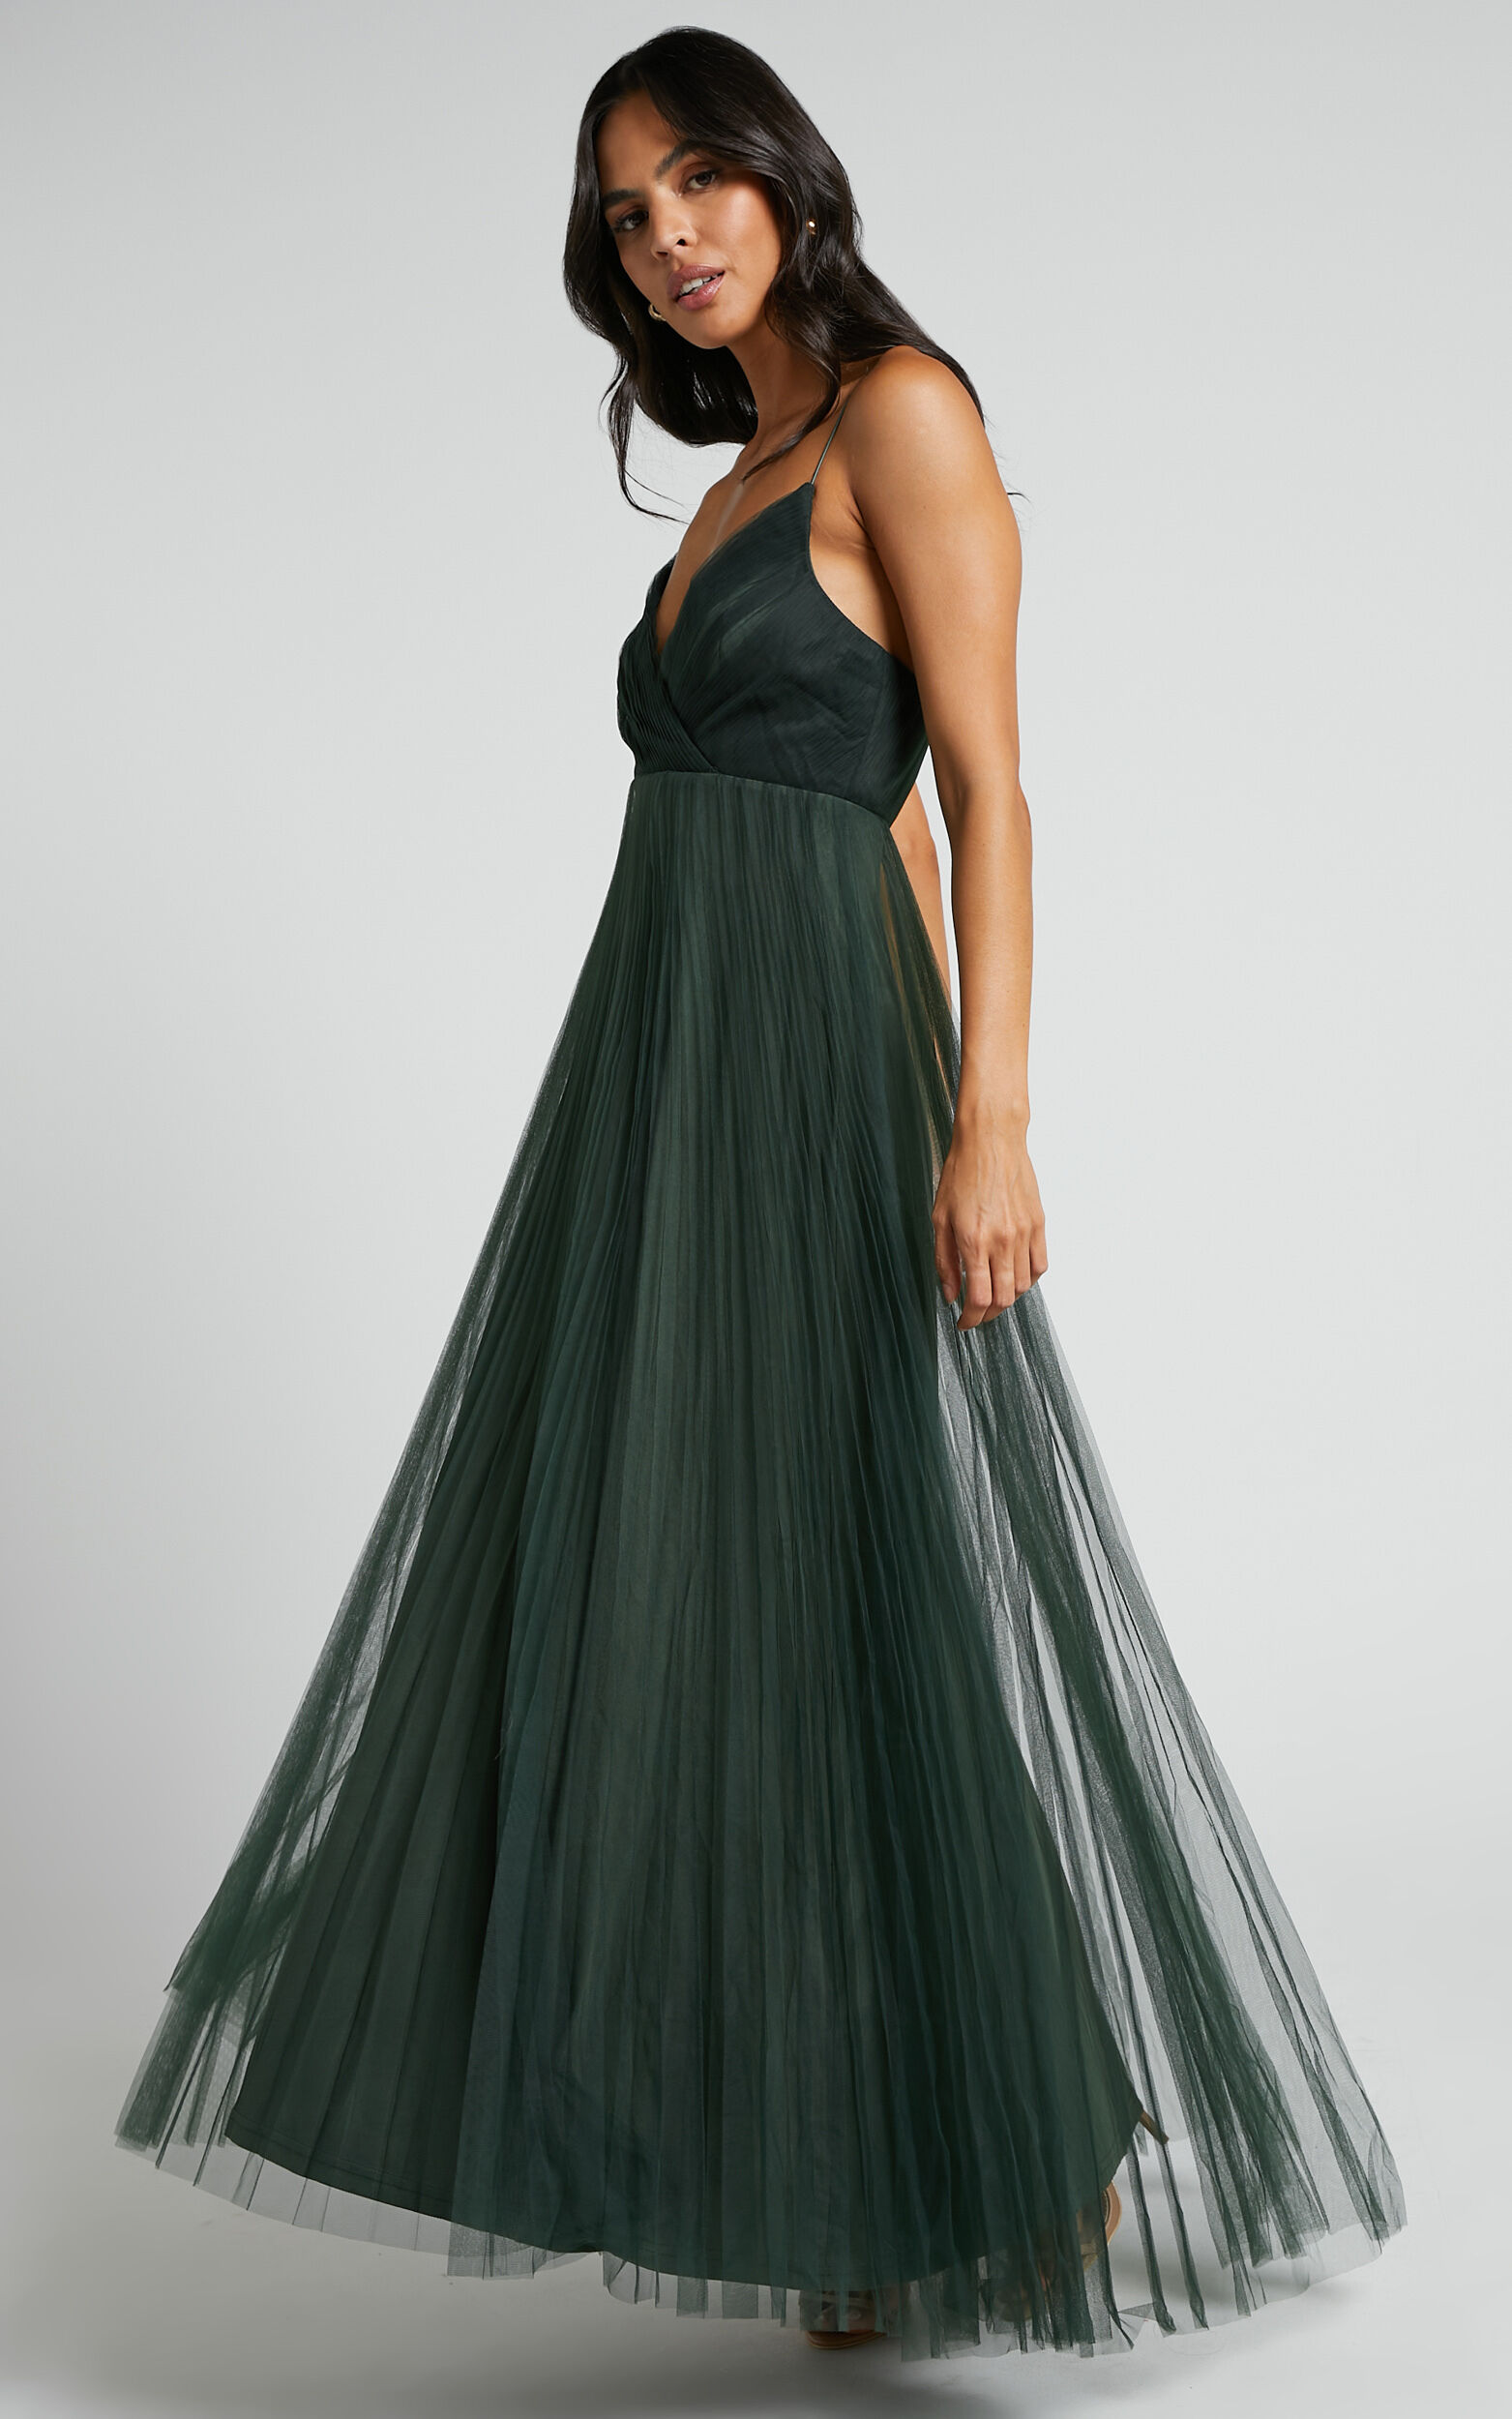 Allany Maxi Dress - Faux Wrap Bodice Pleated Tulle Dress in Emerald